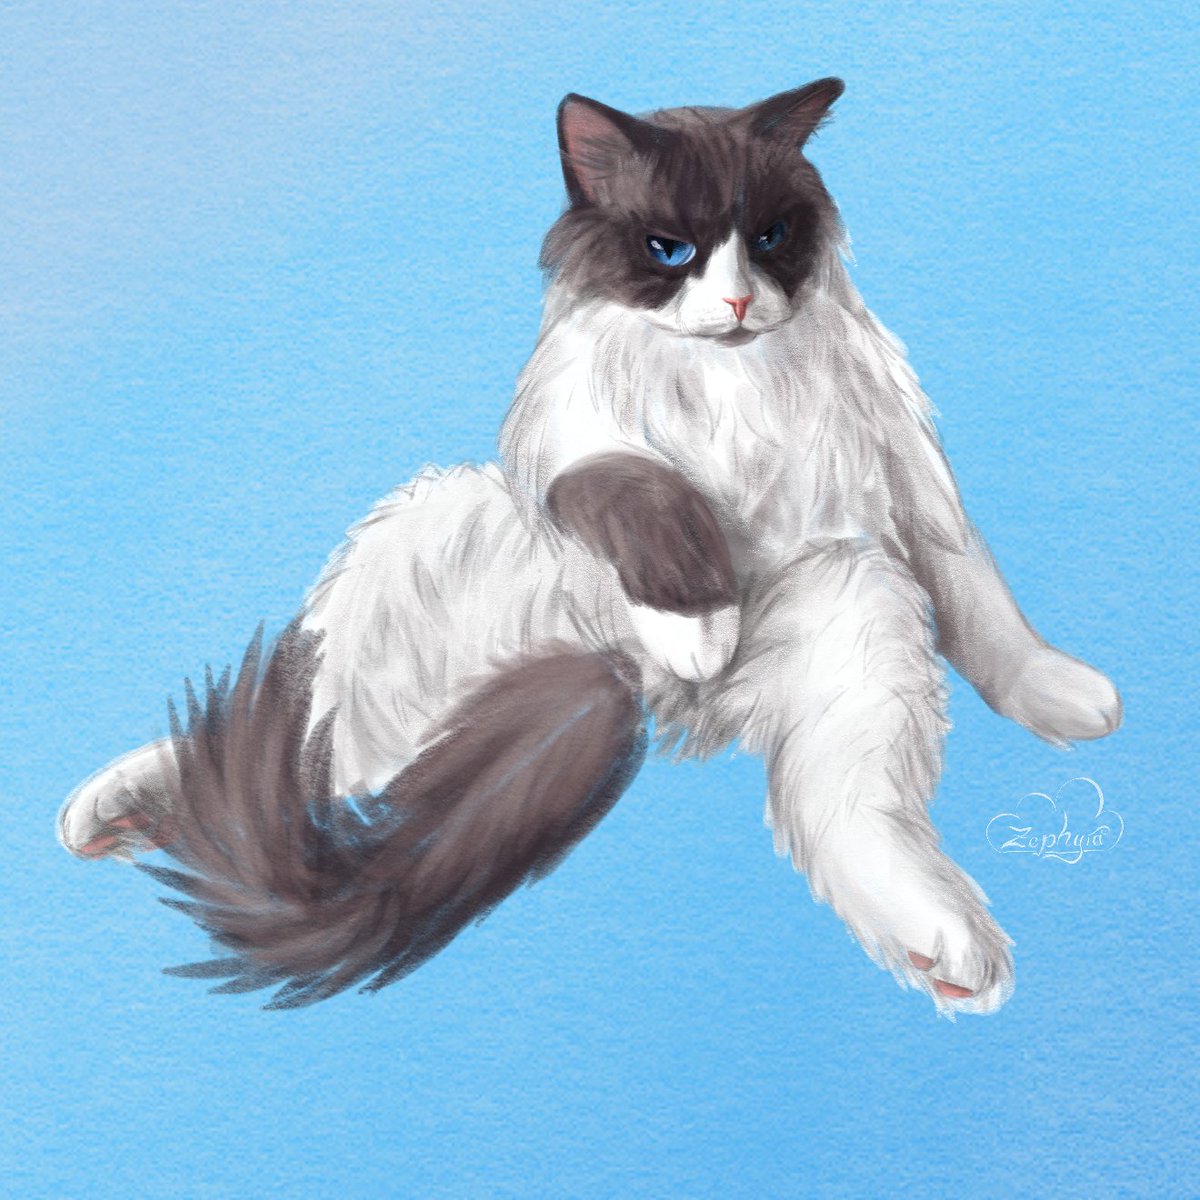 This is Eddie. He is my cat. I drew him because I want and I can. You are welcome #cat #ragdollcat #drawing #digitalart #catdrawing #sosexy